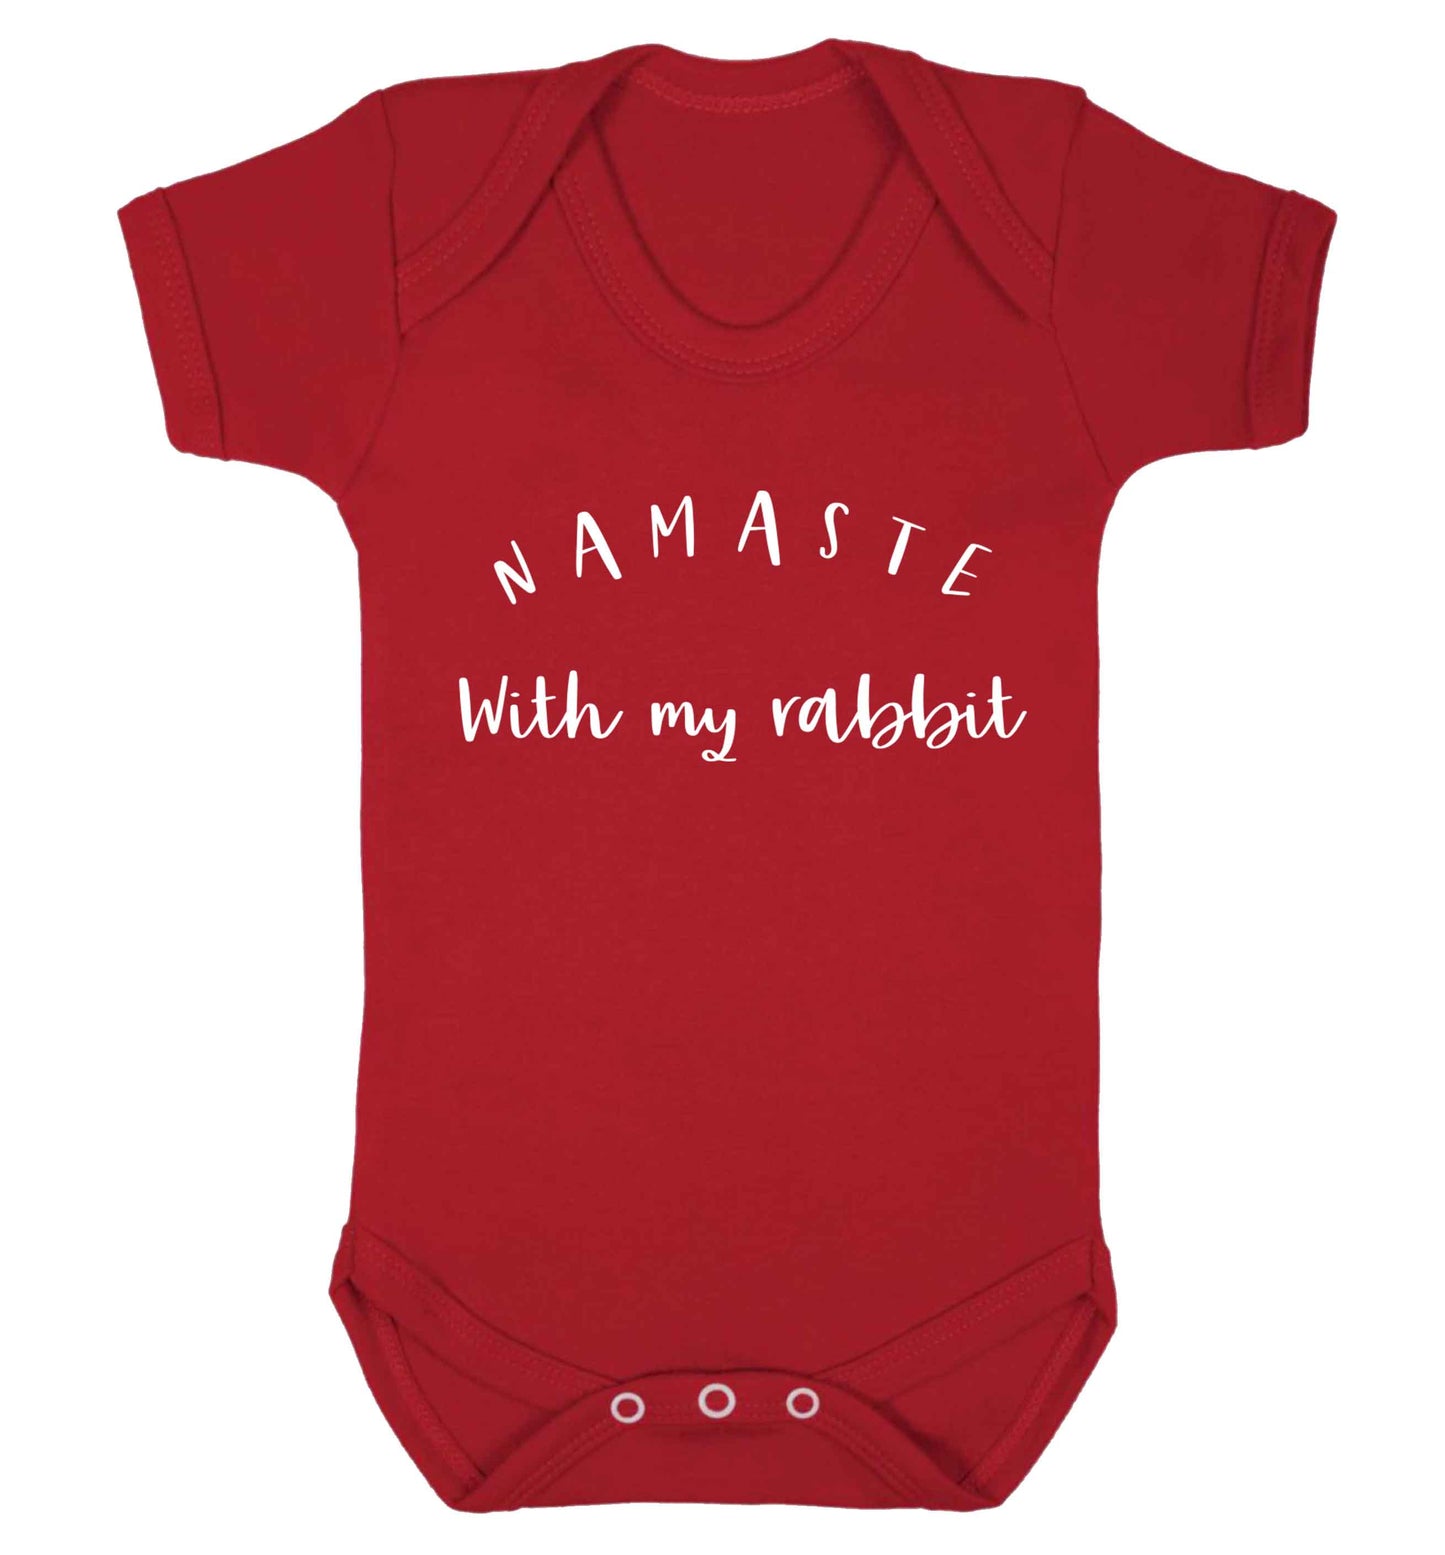 Namaste with my rabbit Baby Vest red 18-24 months